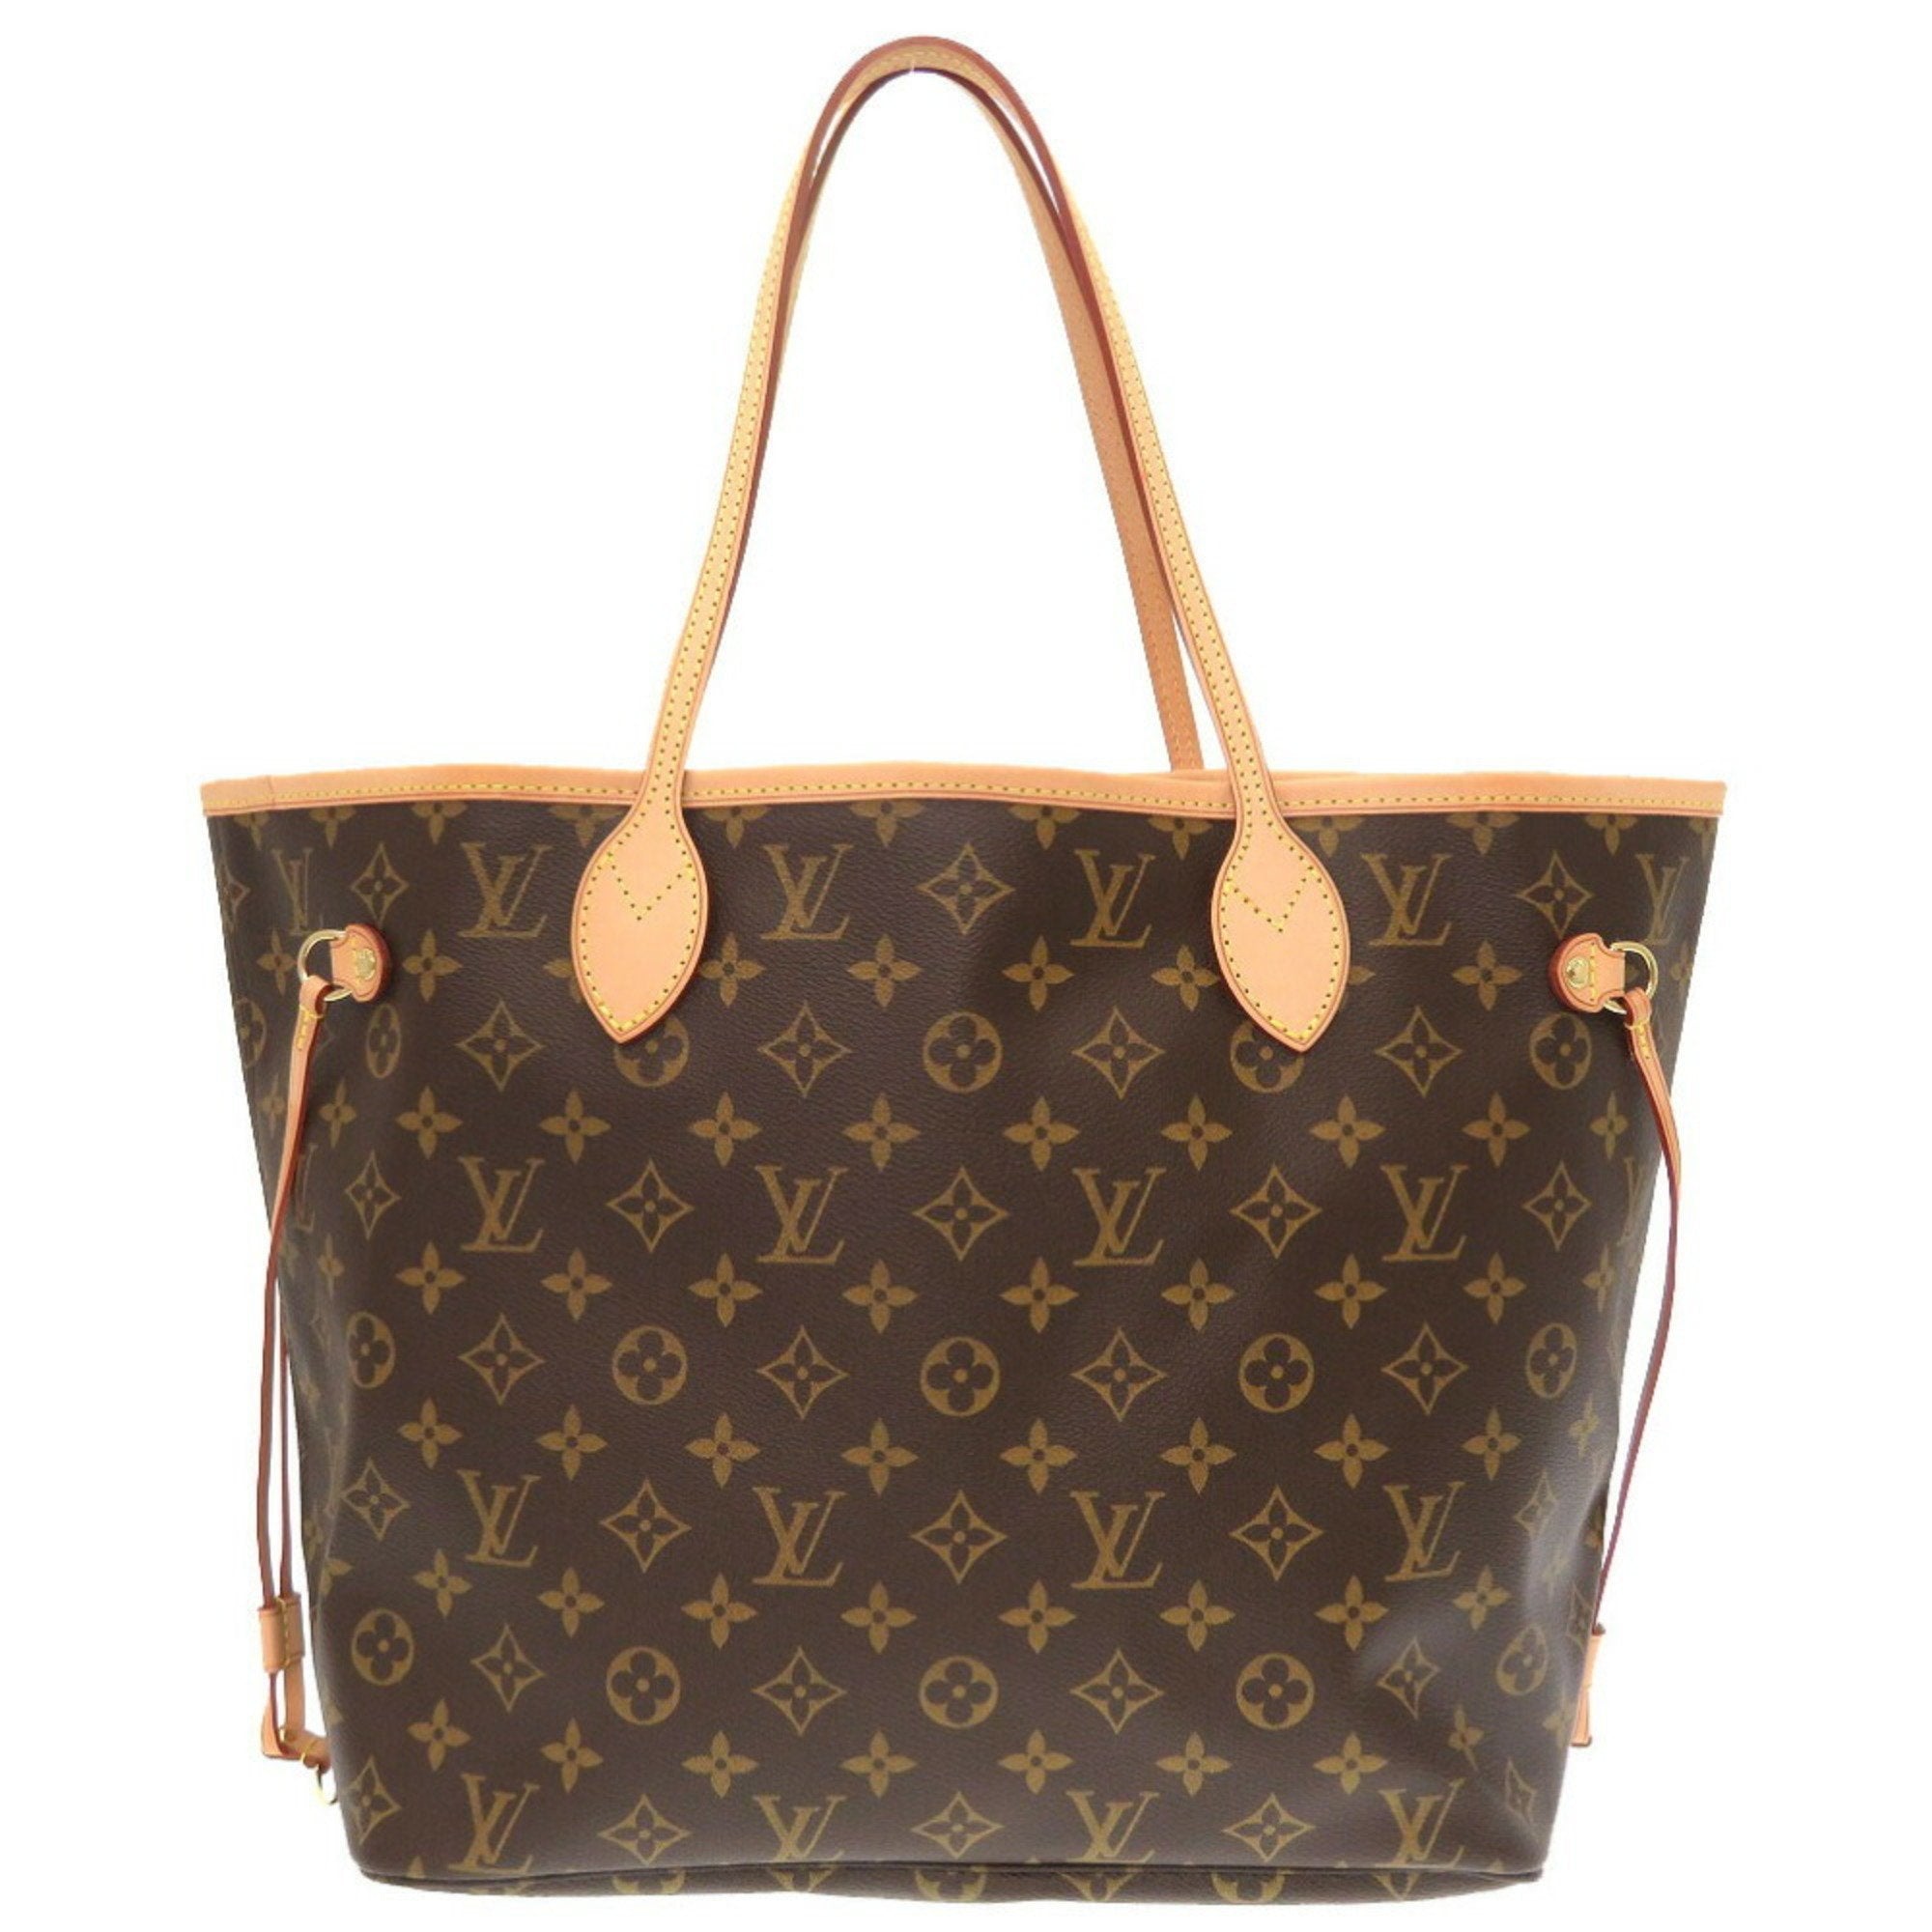 A Guide to Authenticating the Louis Vuitton Cabas Cruise Tote